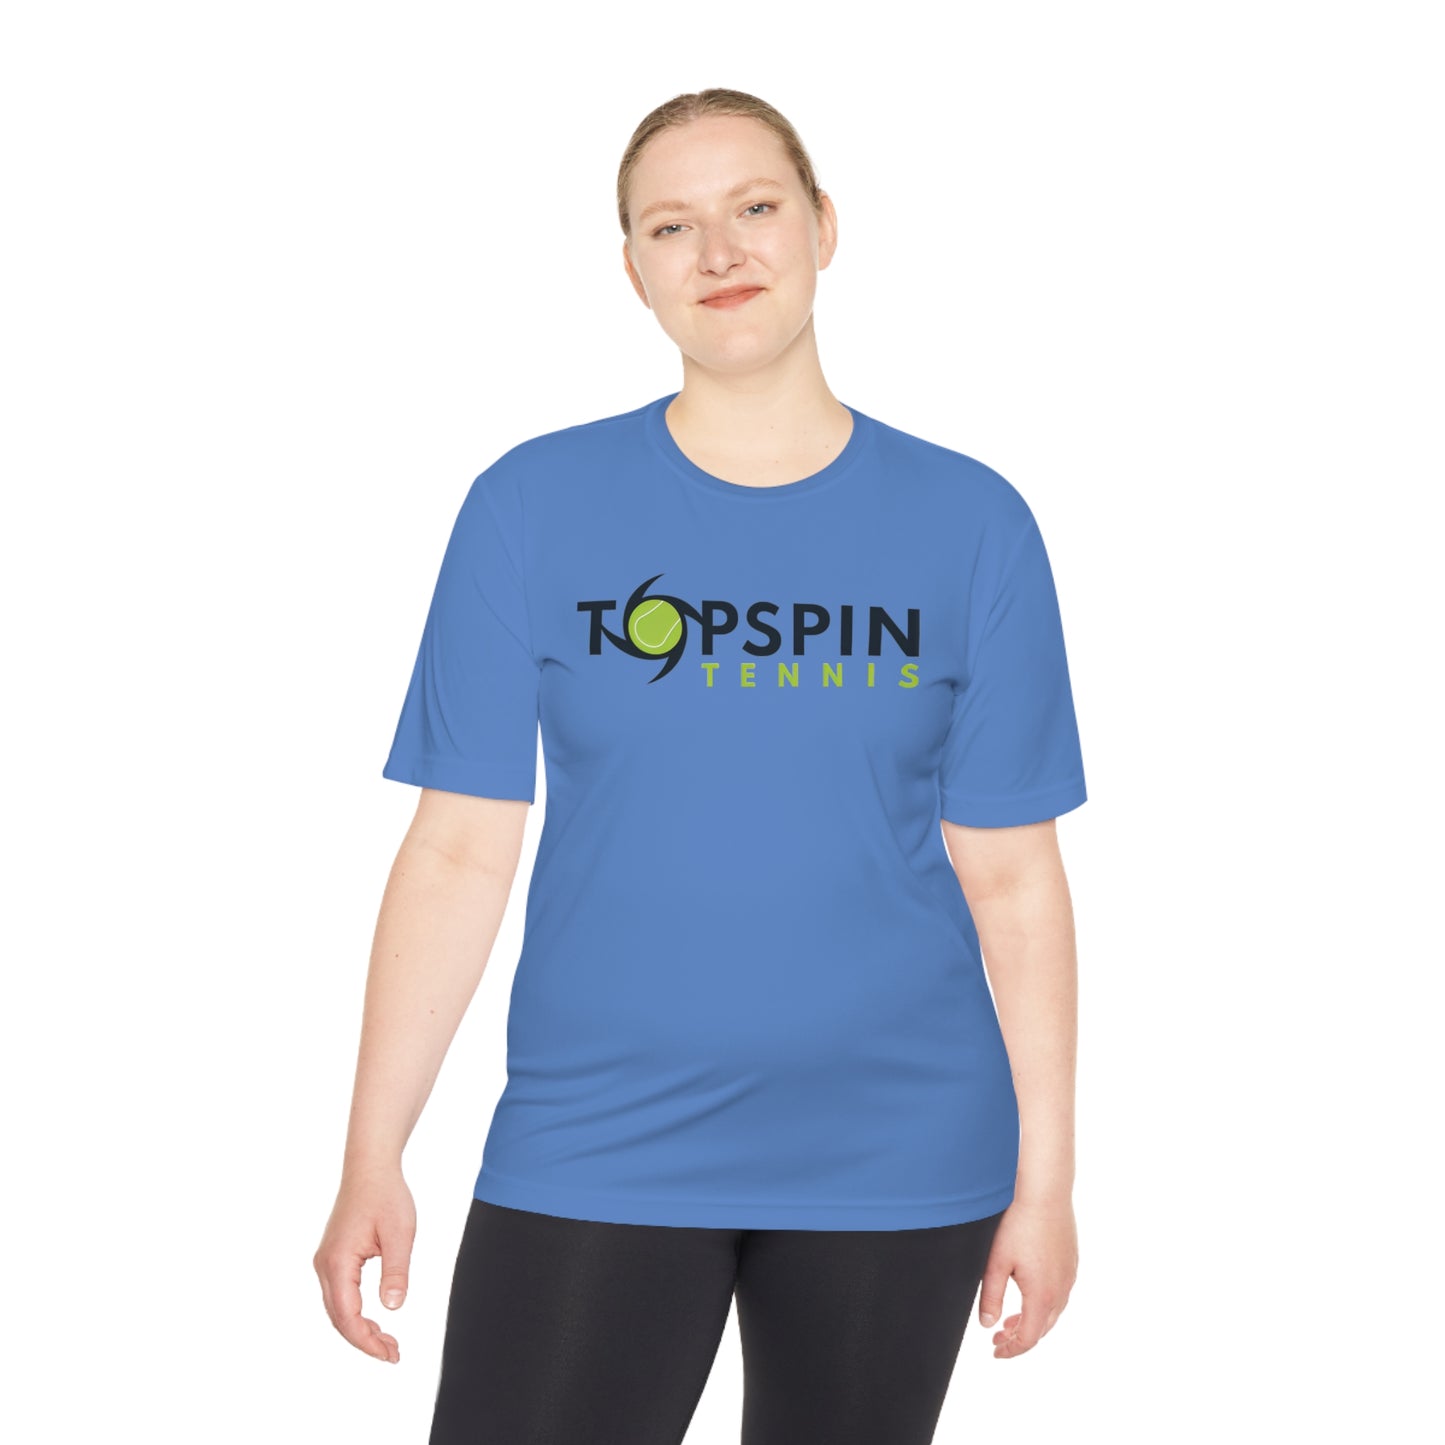 Topspin Tennis Unisex Athleticwear Shirt (Recommend sizing down)